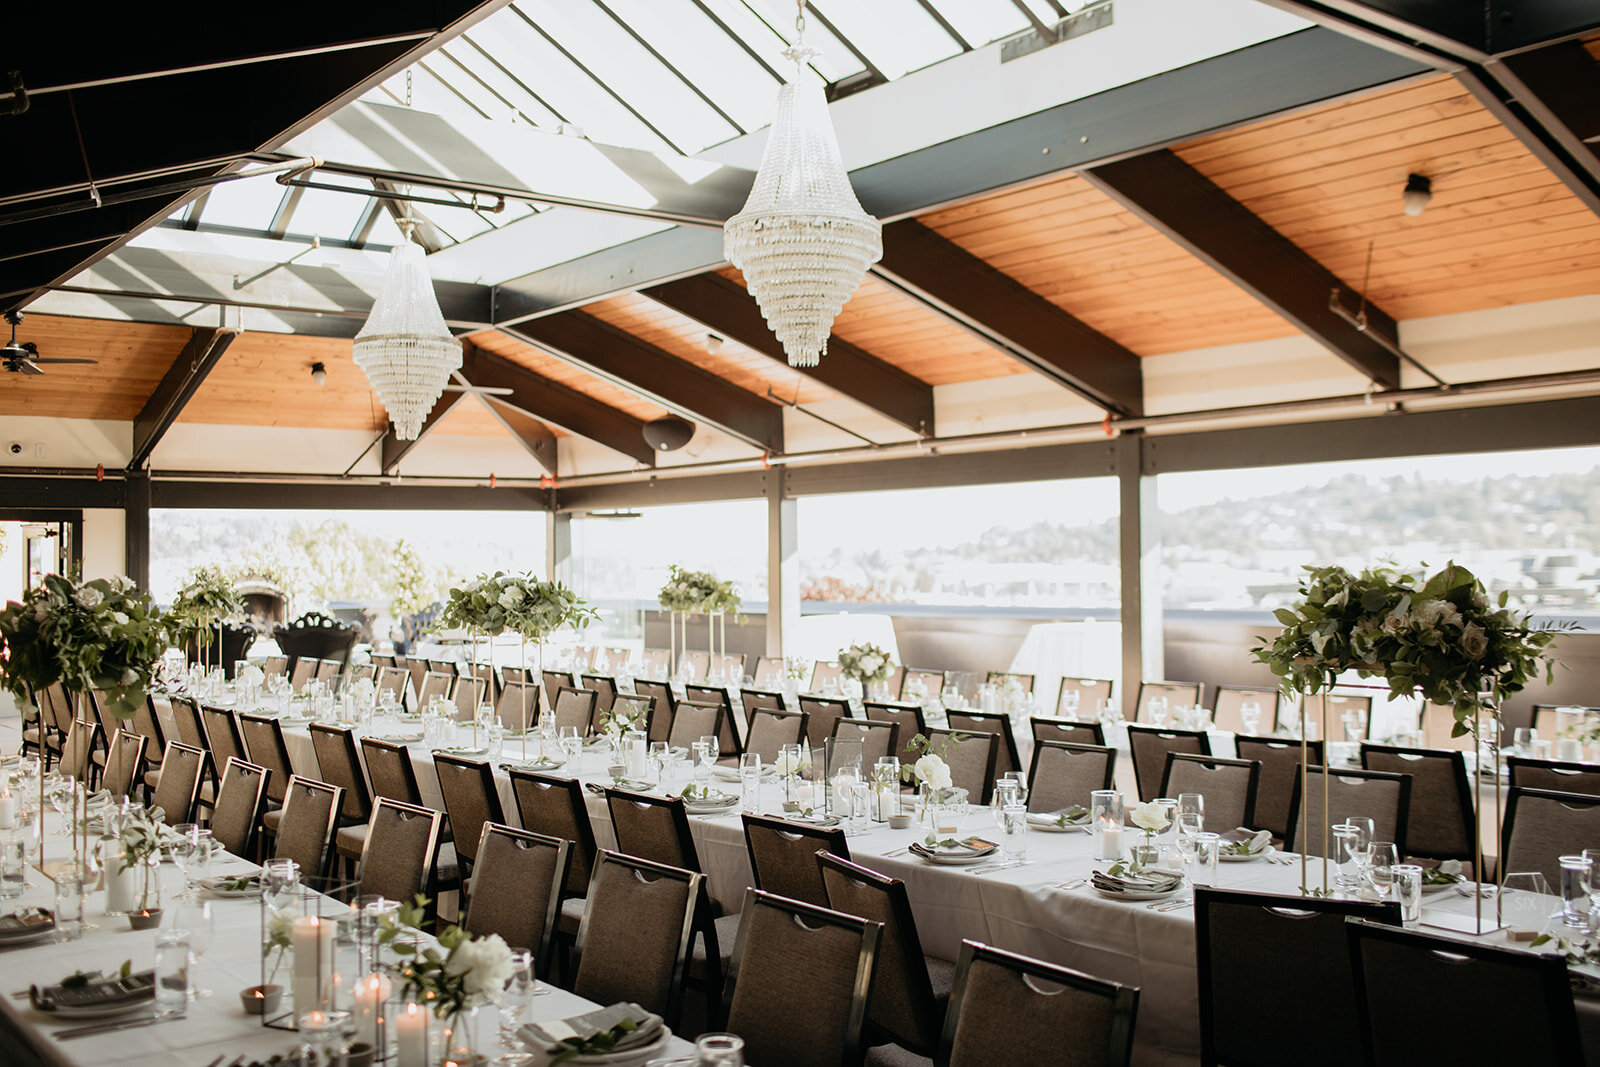 Sublime Stems | Seattle | Florist | Justin Worrall Photography | Olympic Rooftop Pavilion | Wedding Wise